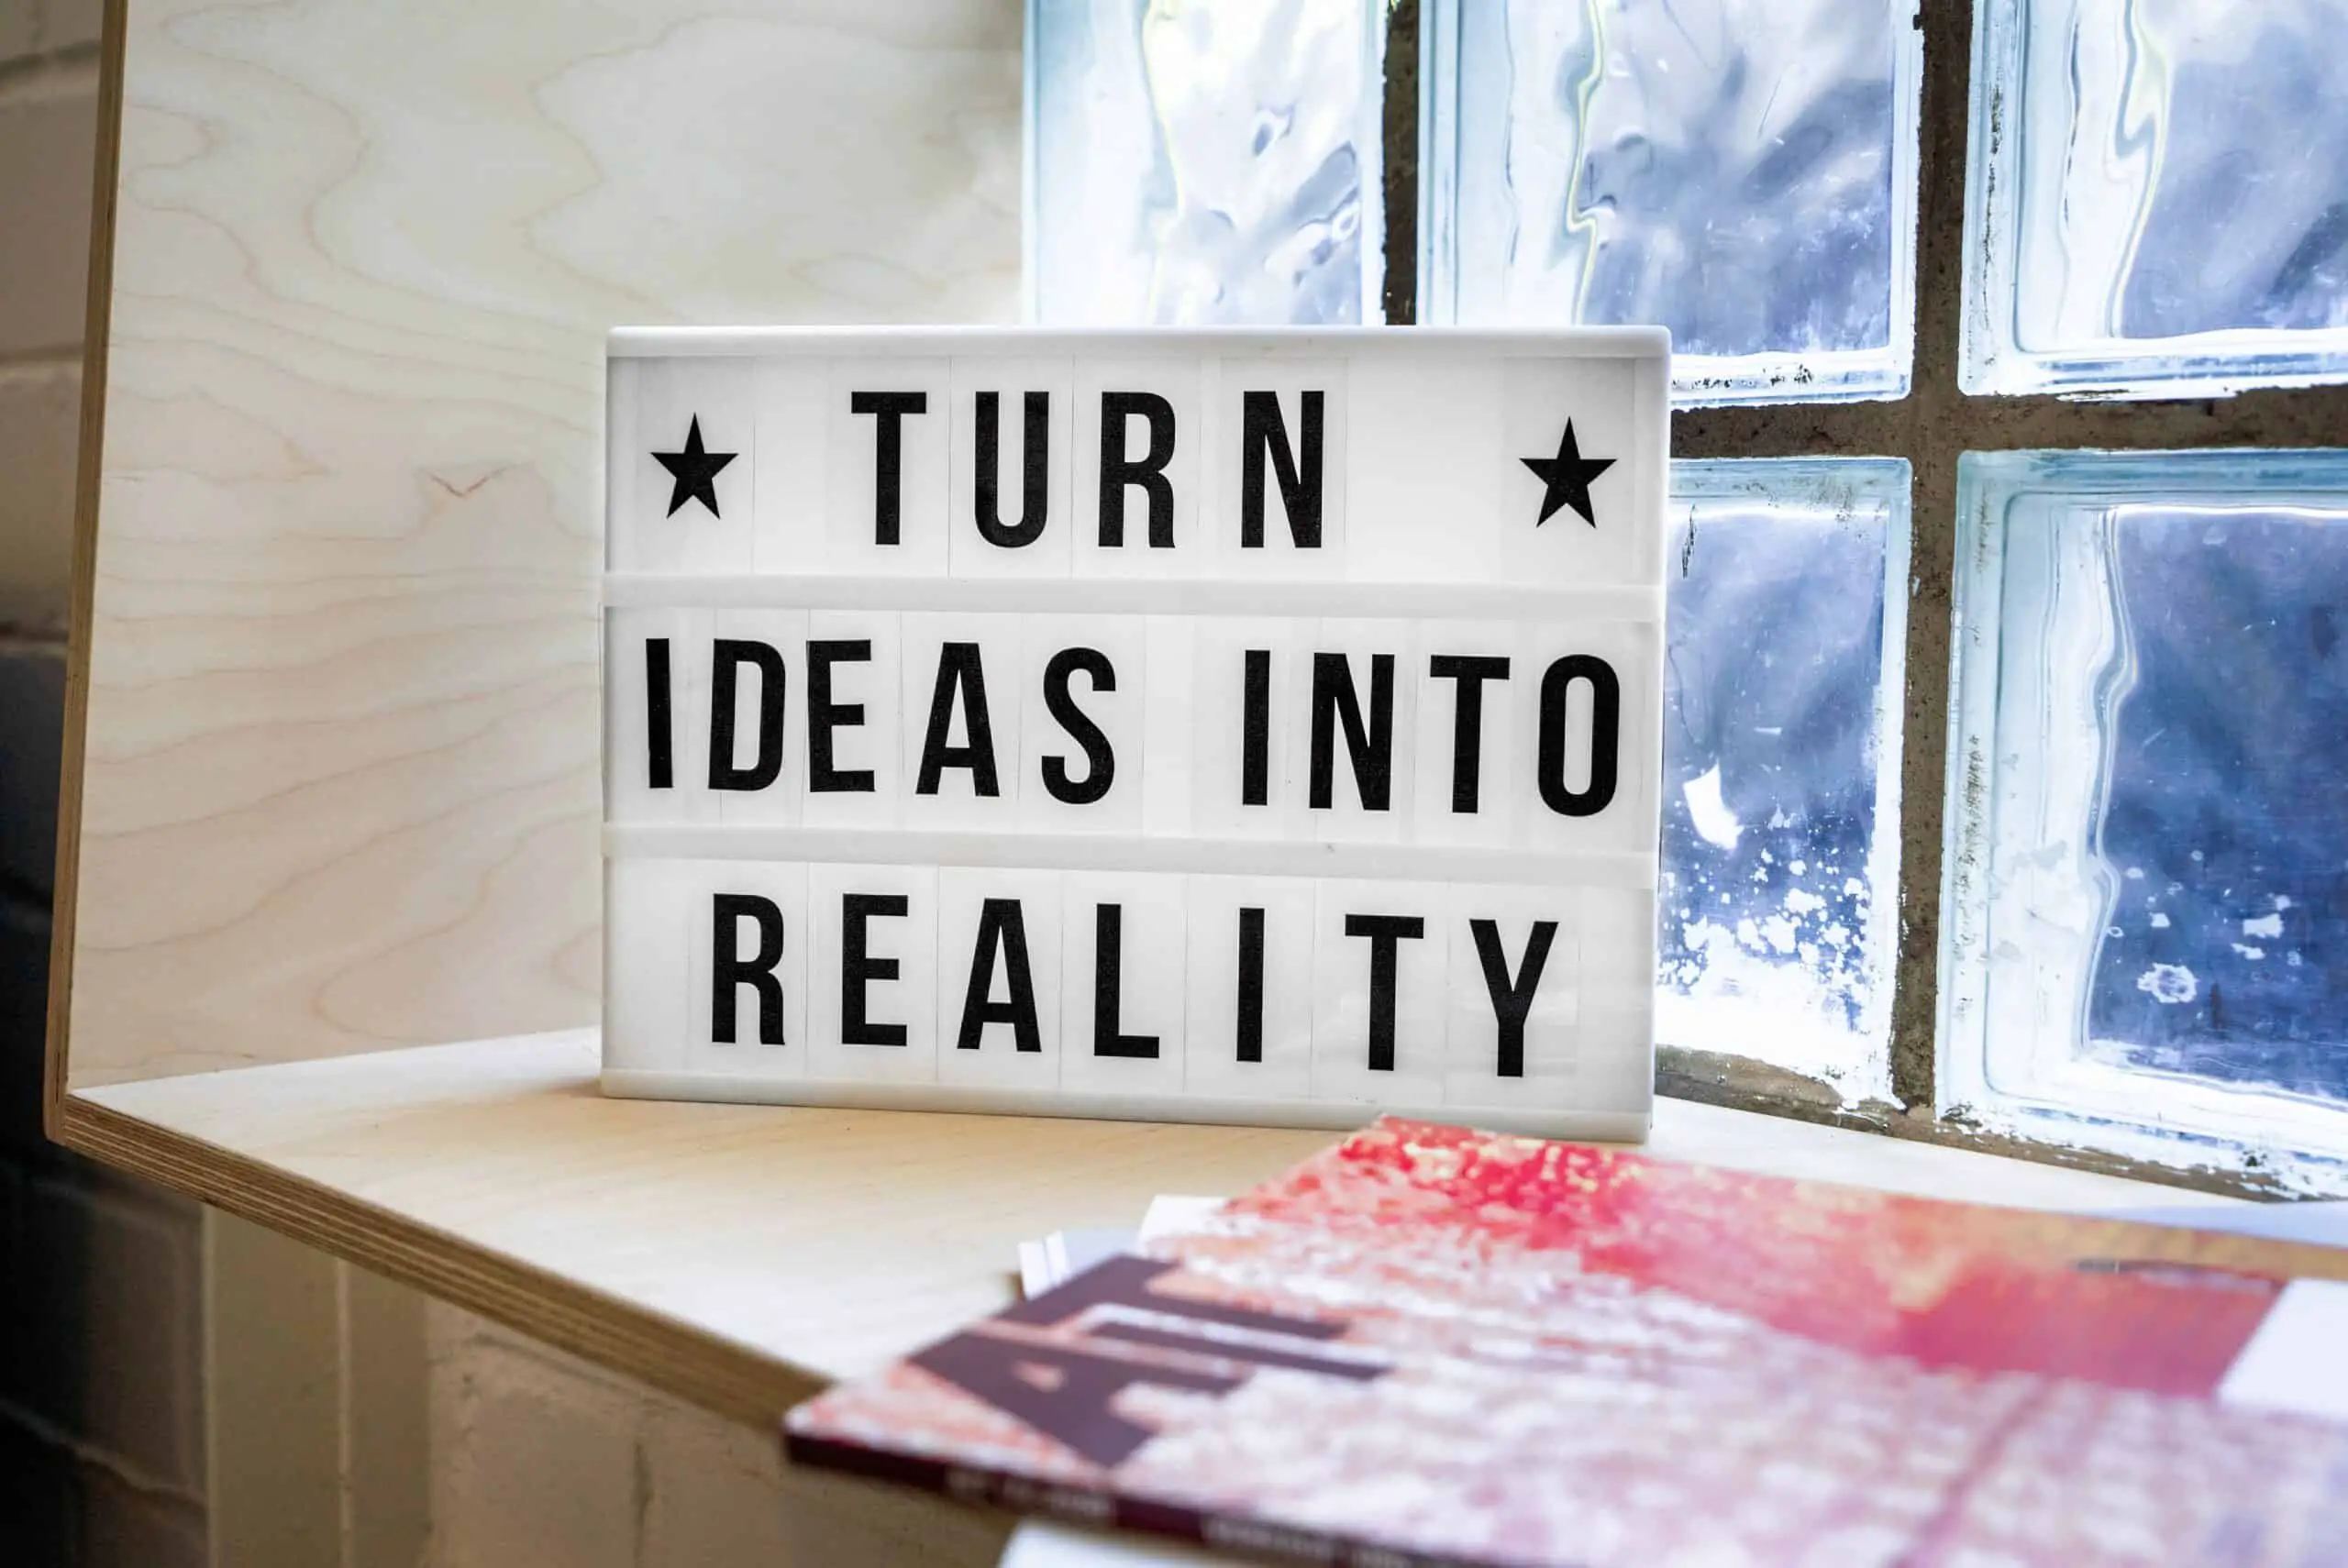 White sign on table saying "Turn Ideas Into Reality"